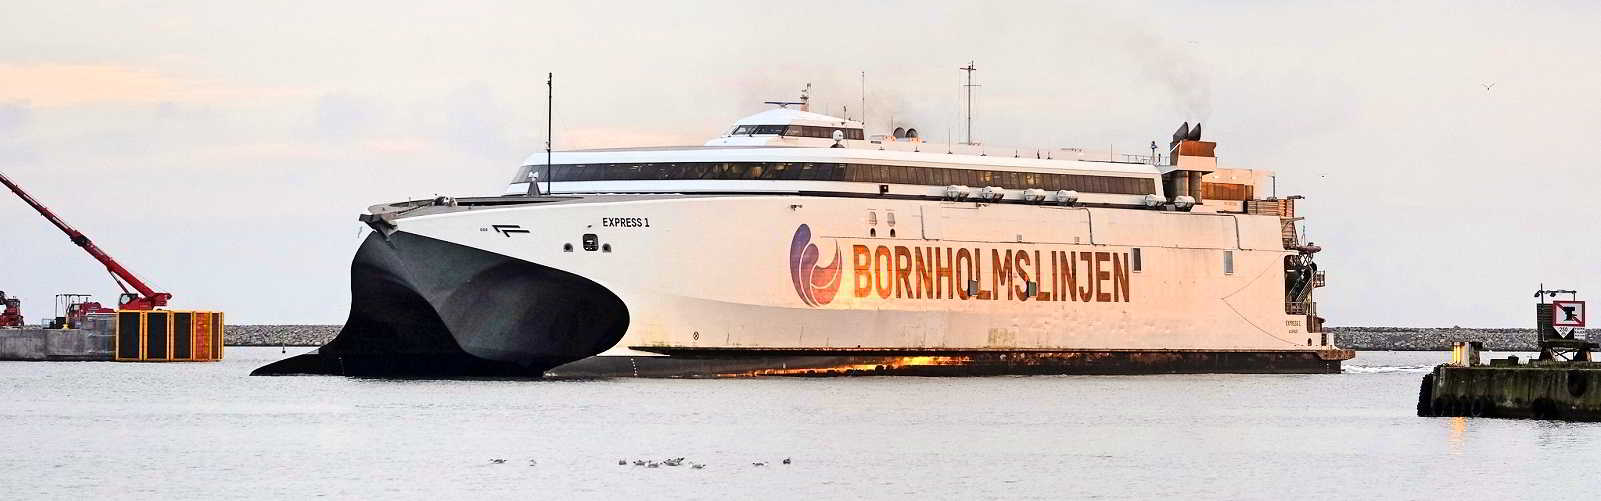 Ferries to Bornholm from Sassnitz carry